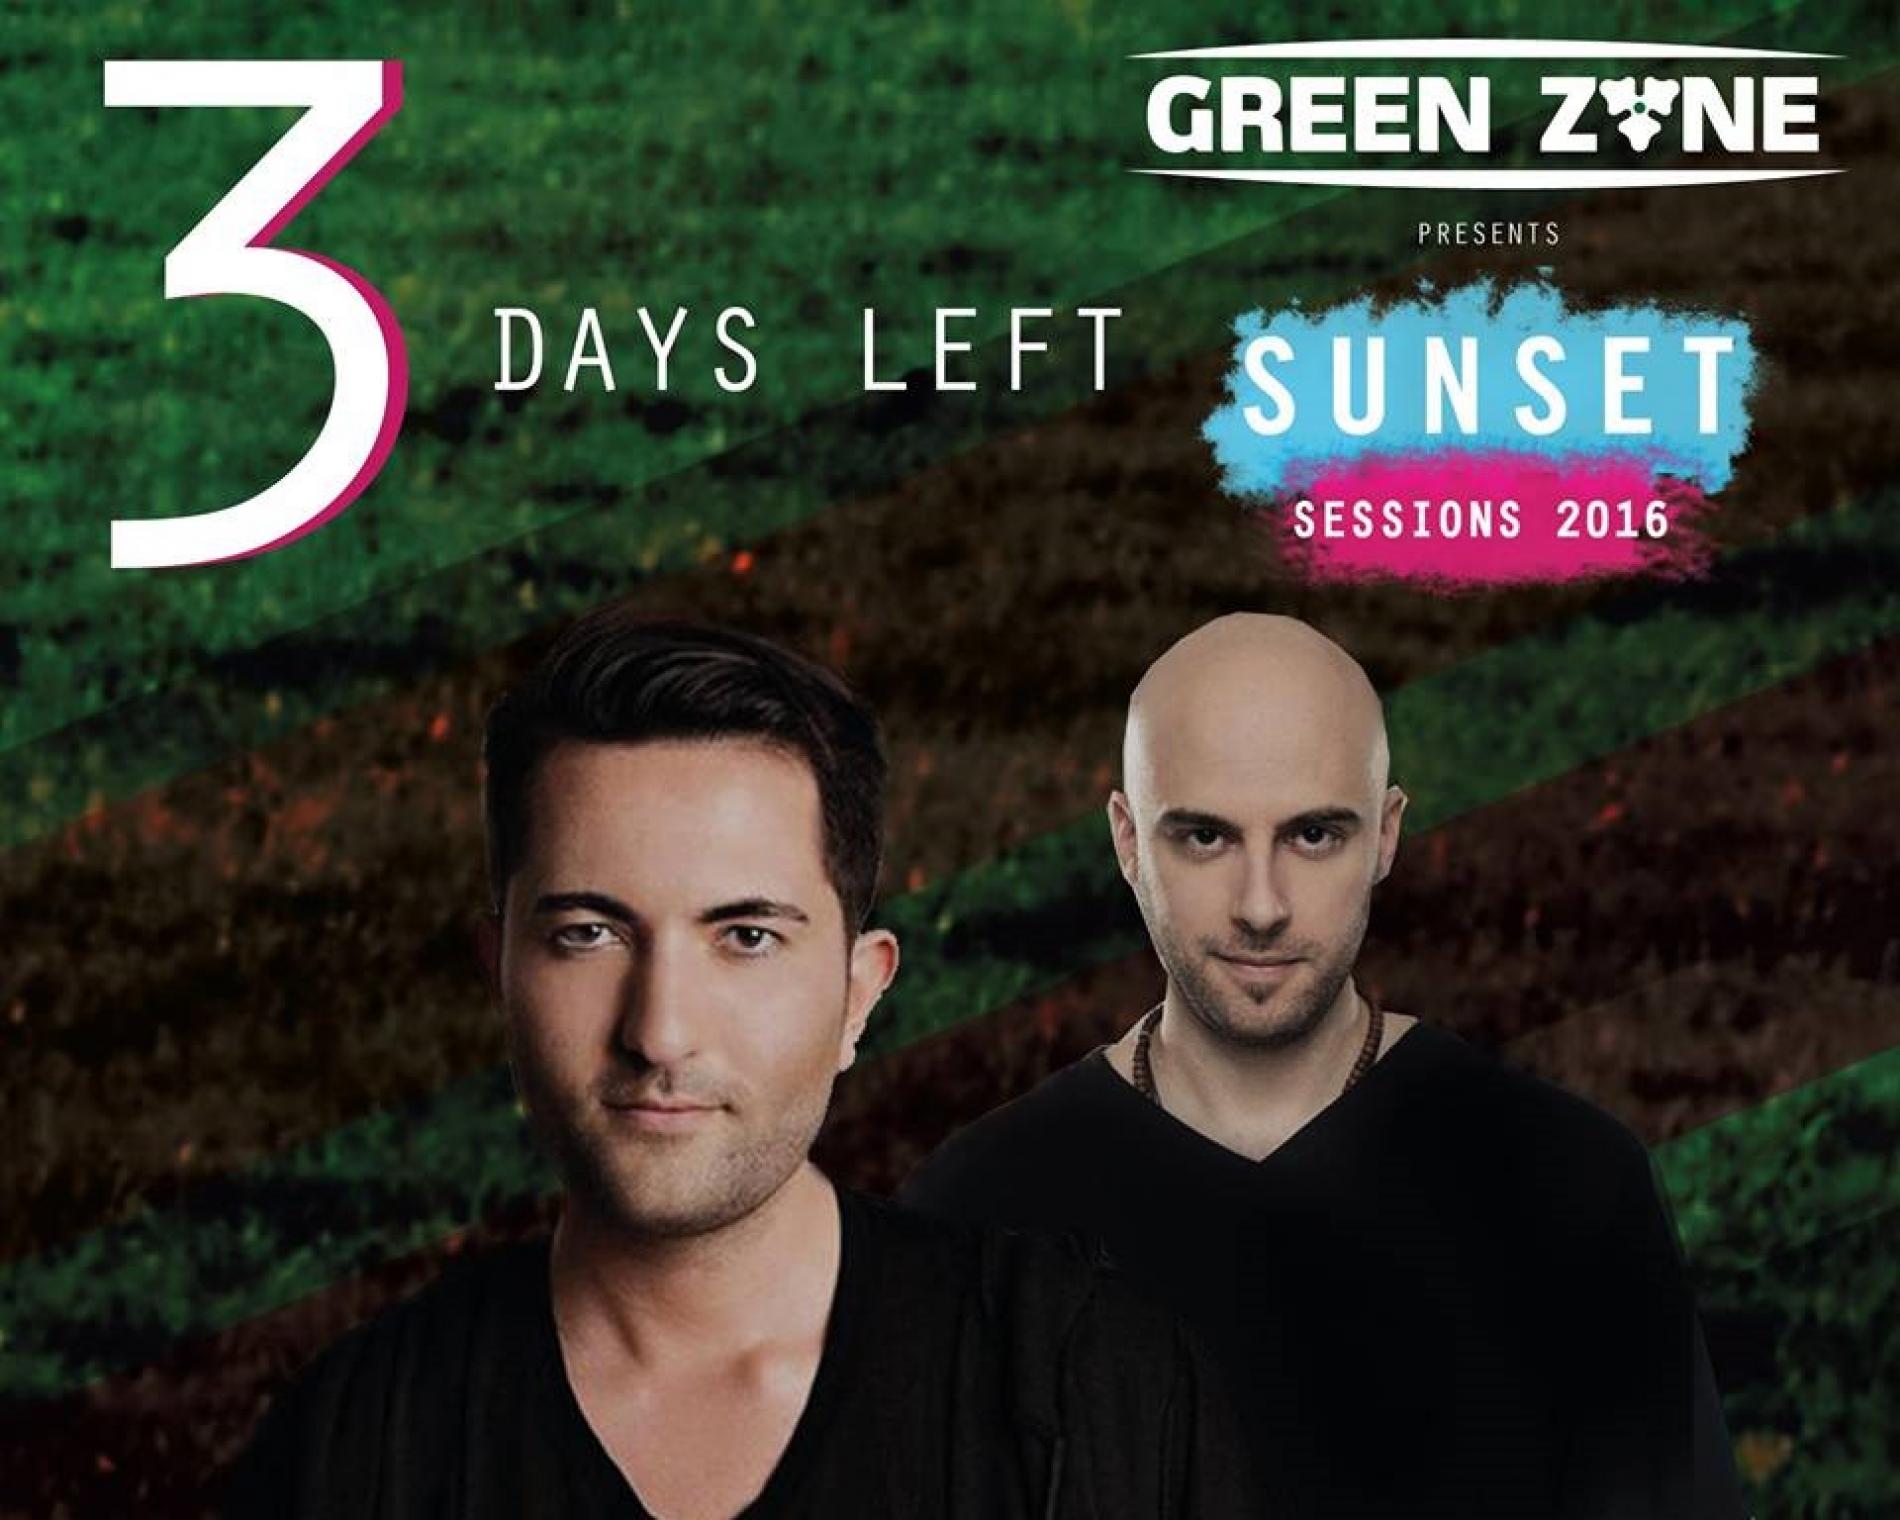 3 More Days Till The Sunset Music Session